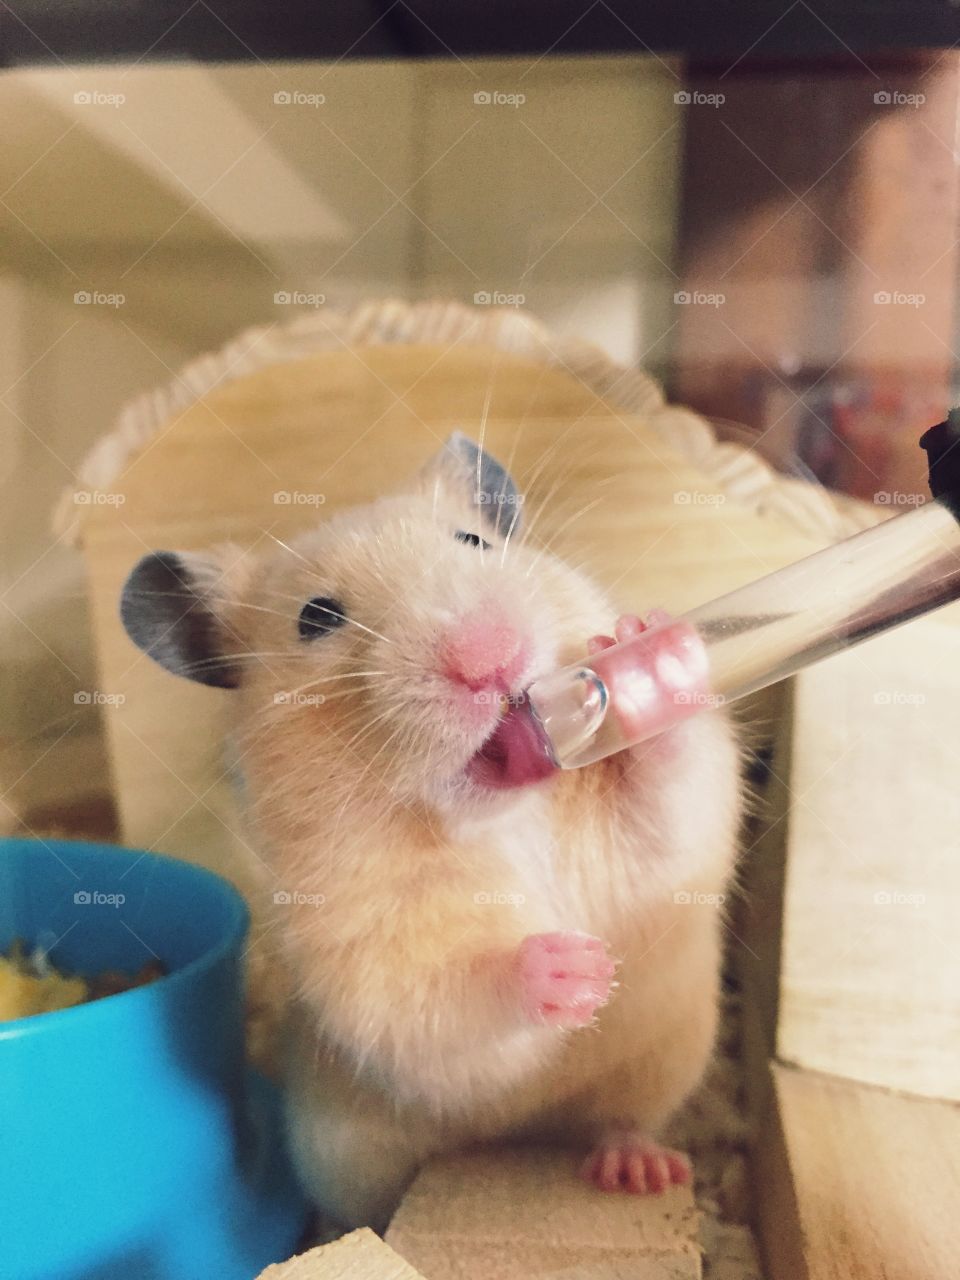 my hamster drinking water.